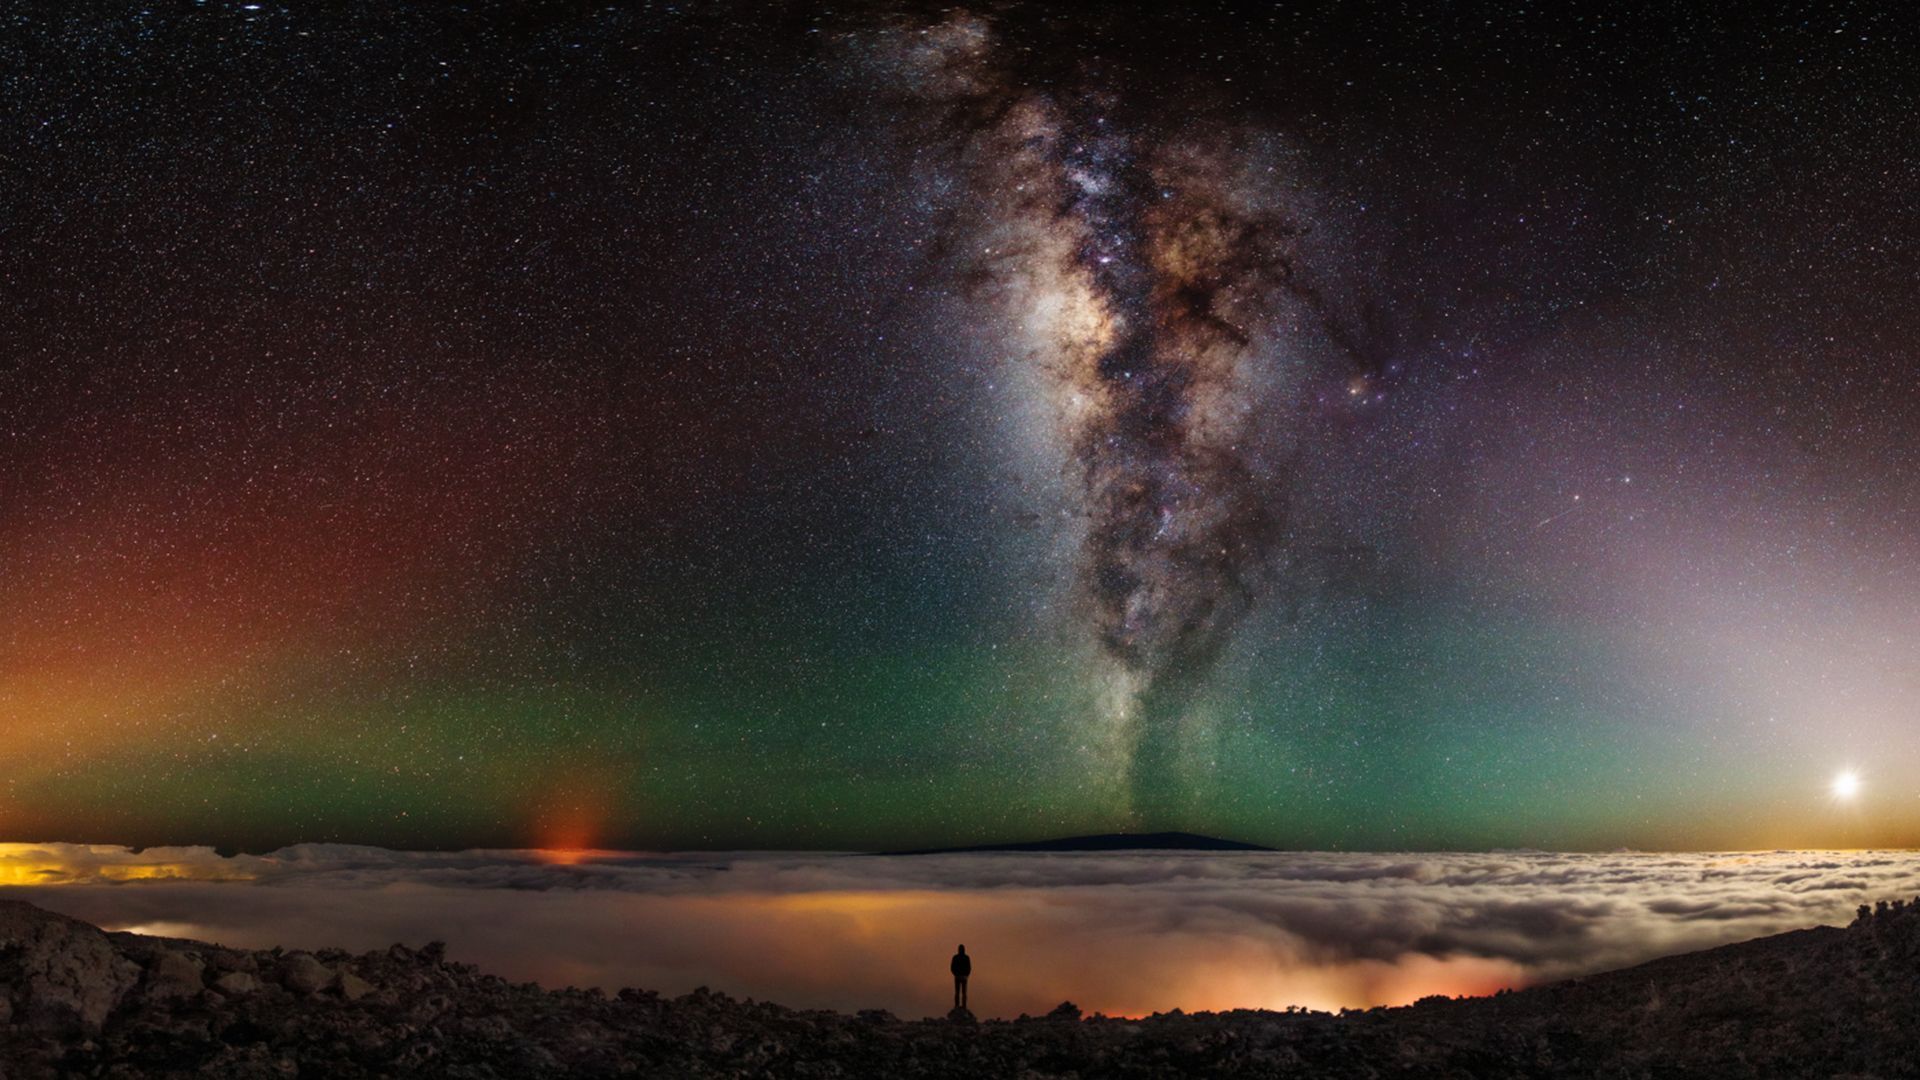 Man standing at edge of volcano with milky way, planets in